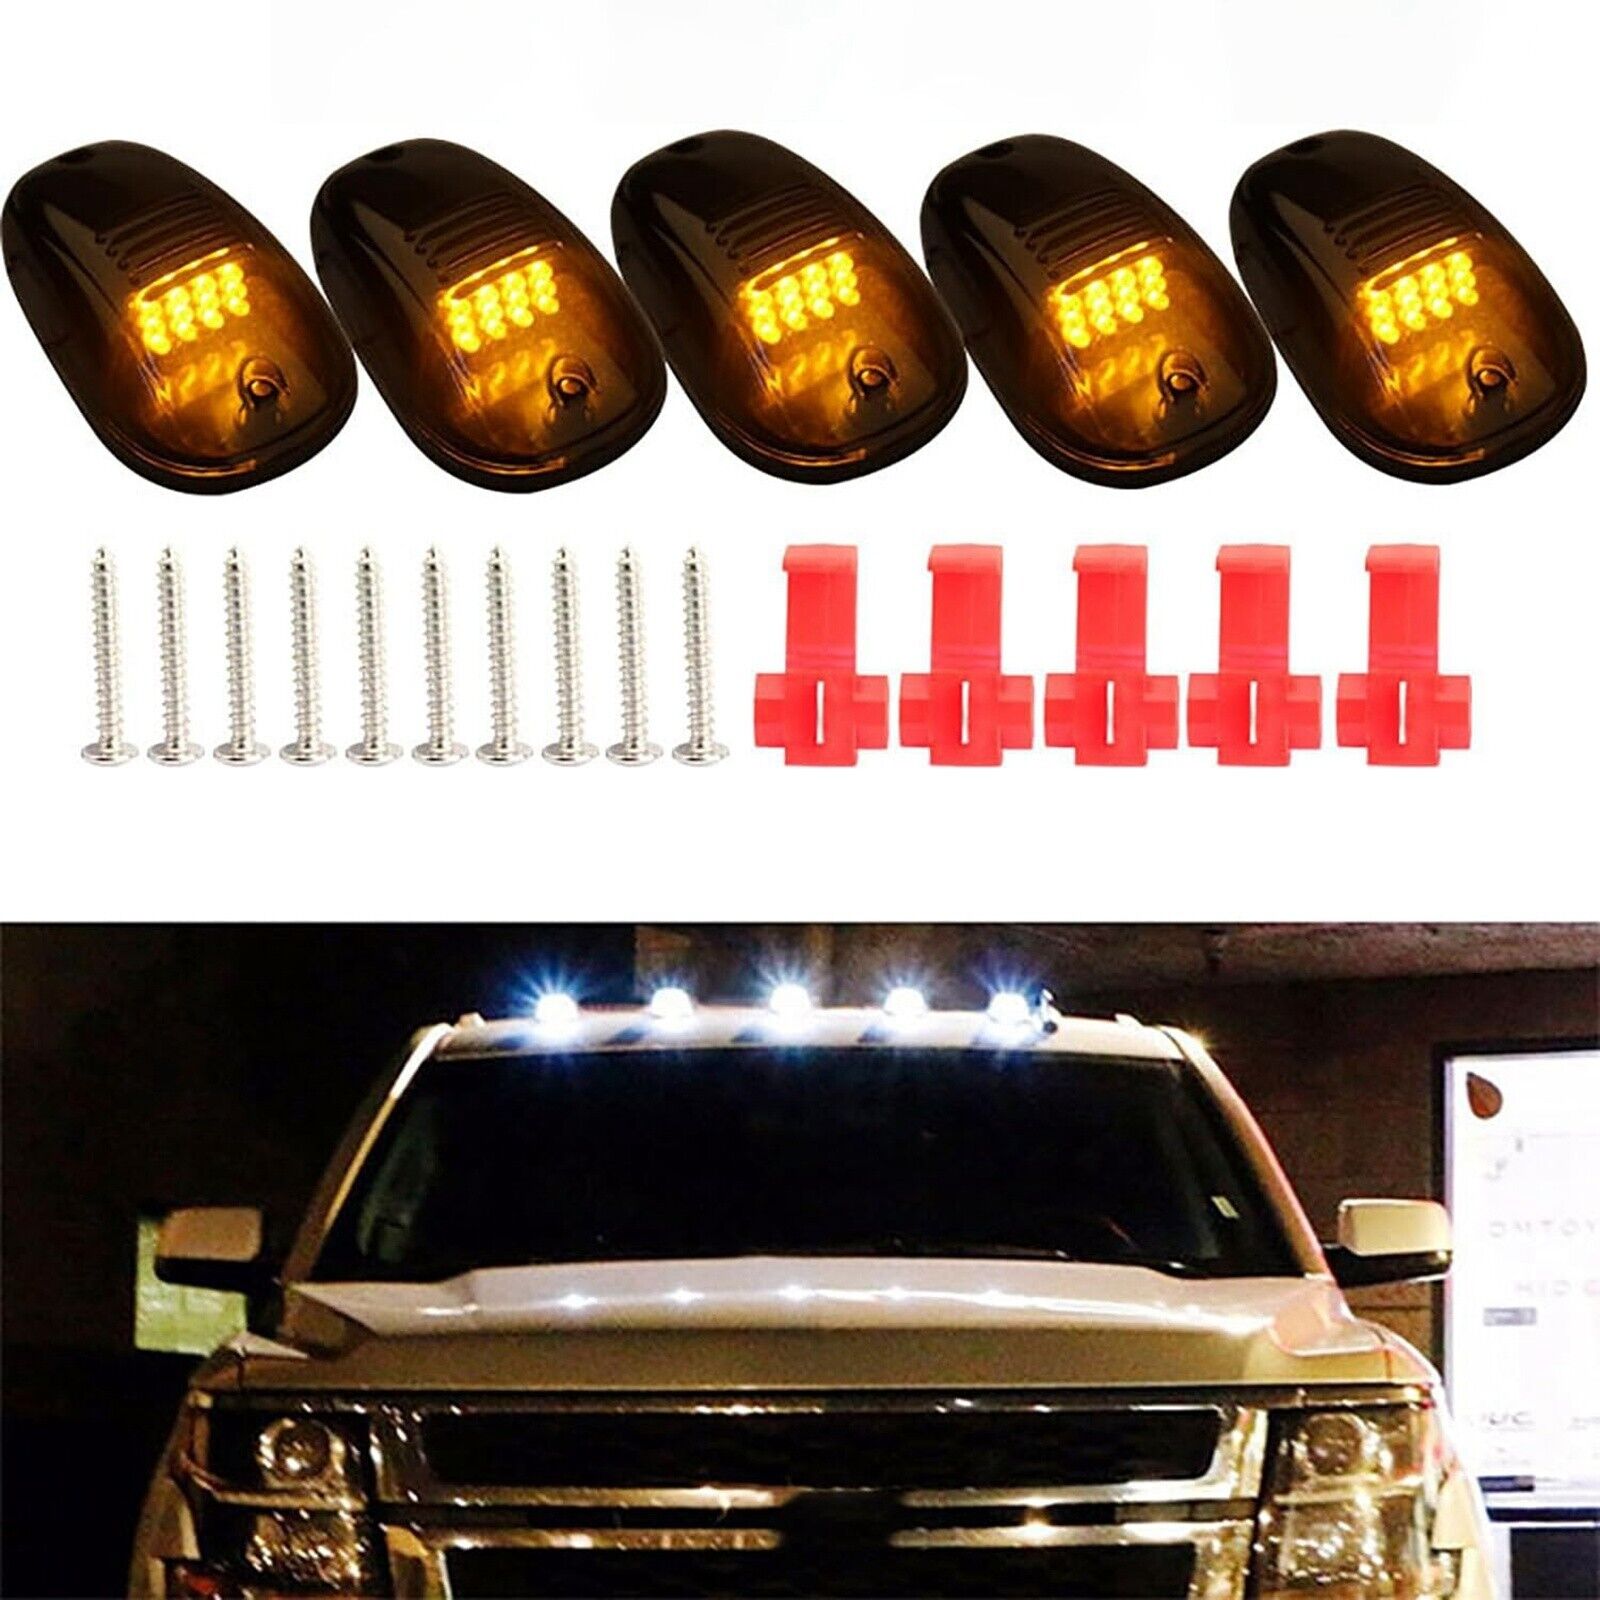 1PC No Drill Cab Lights Roof Lights For Trucks Wireless Cab Lights For Truck